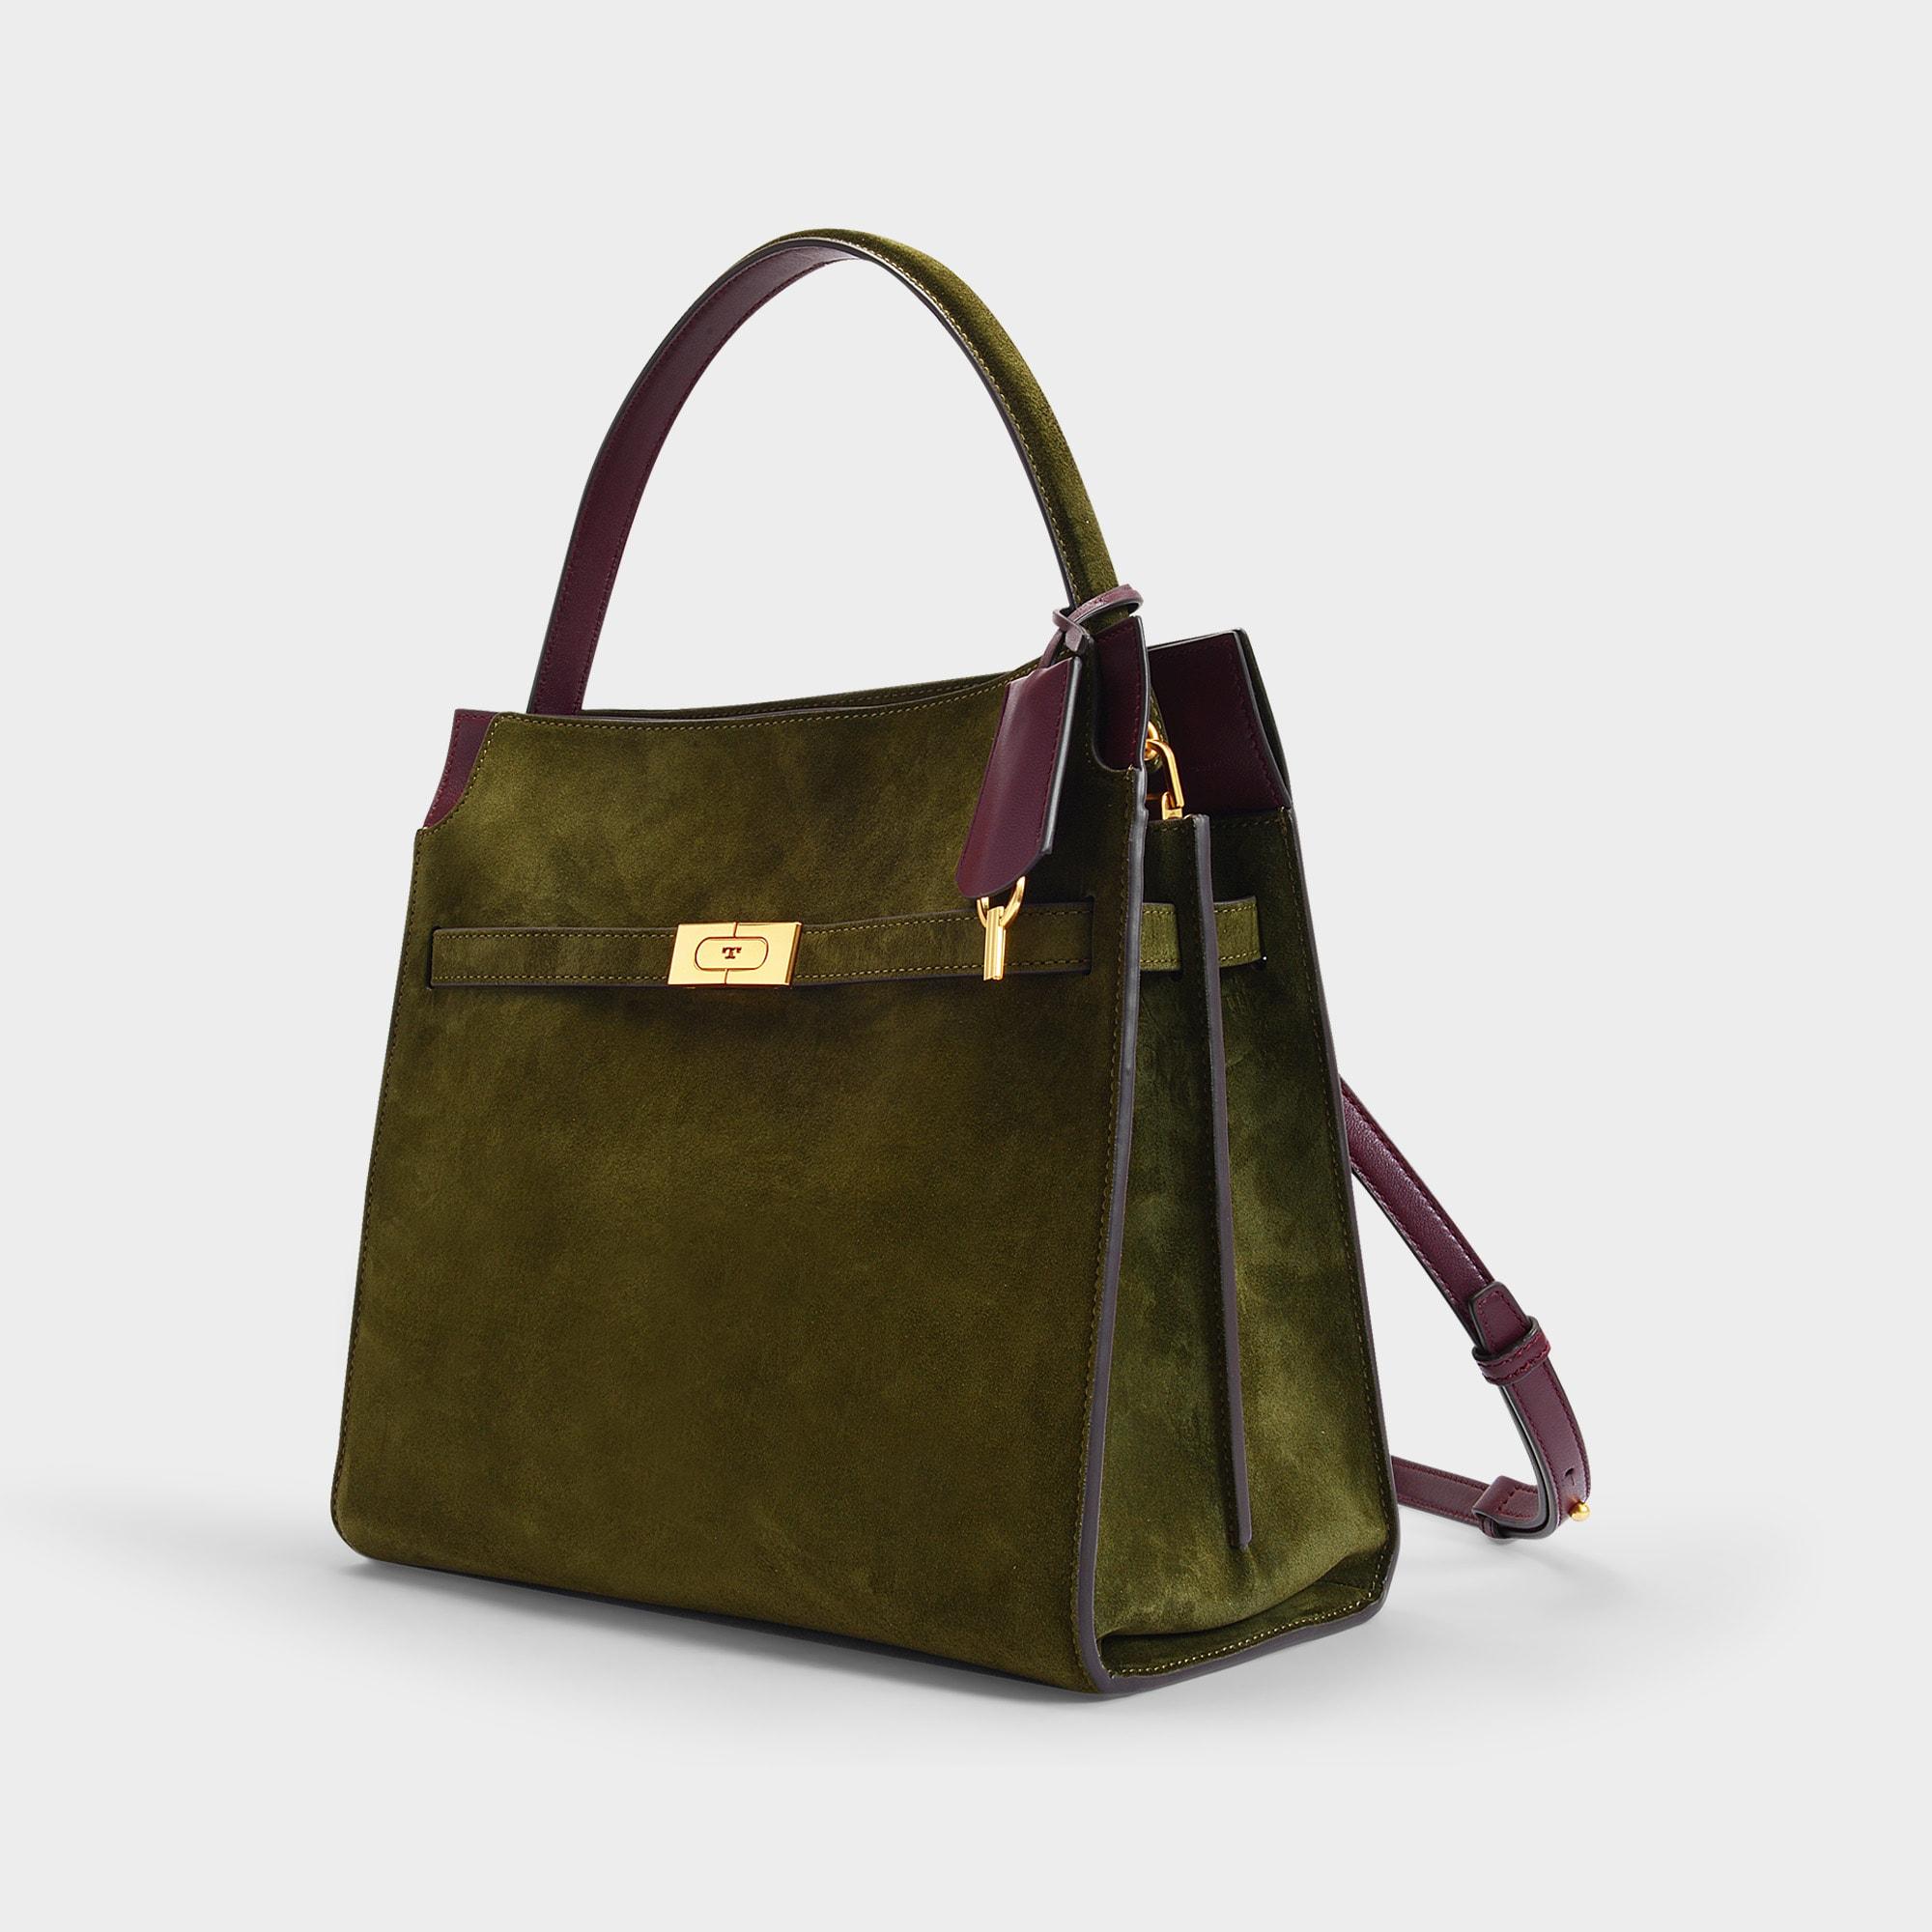 Tory Burch Lee Radziwill Double Bag in Green | Lyst